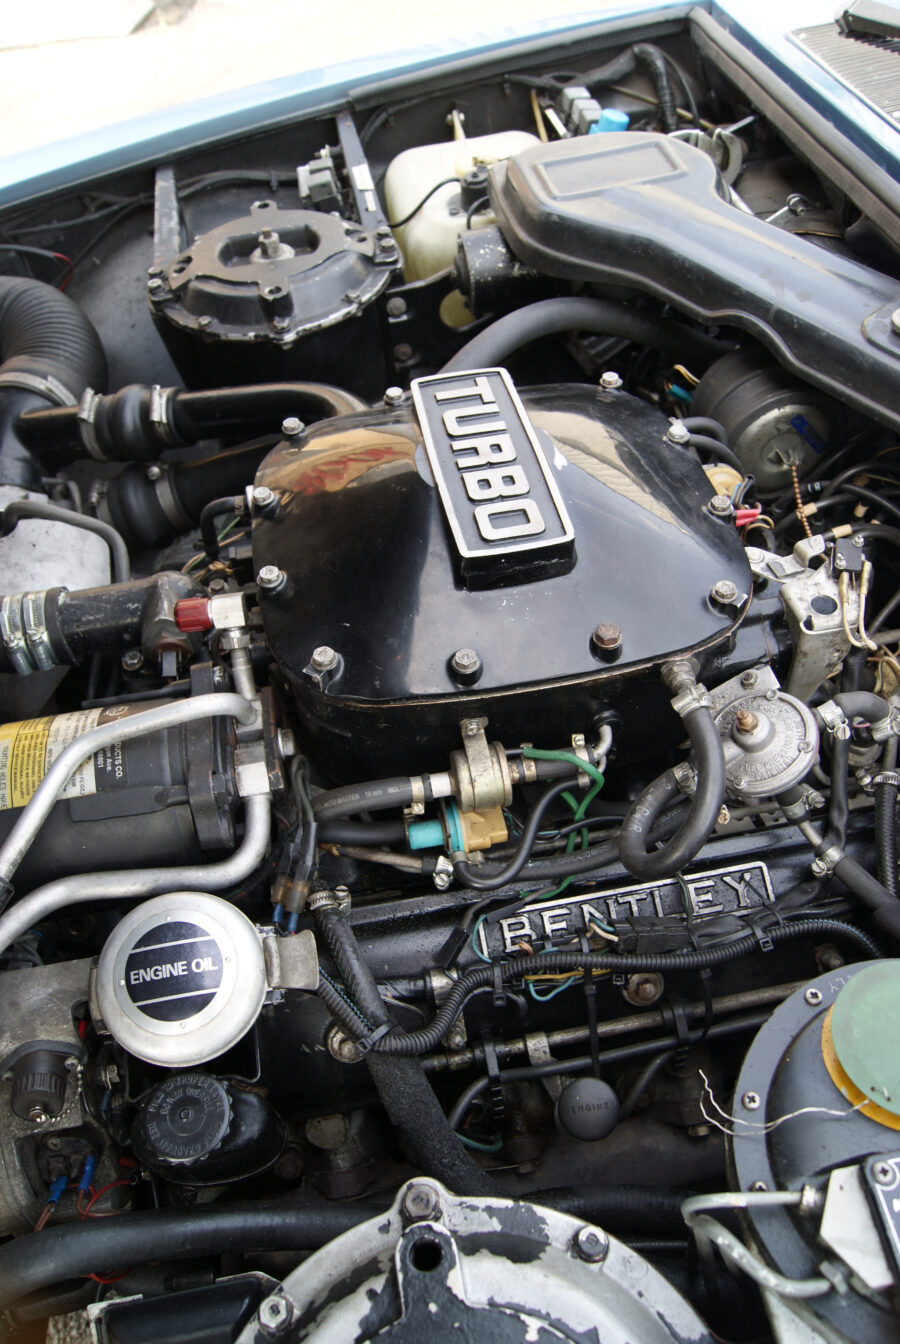 Turbocharged L-Series V8 in the Bentley Mulsanne Turbo